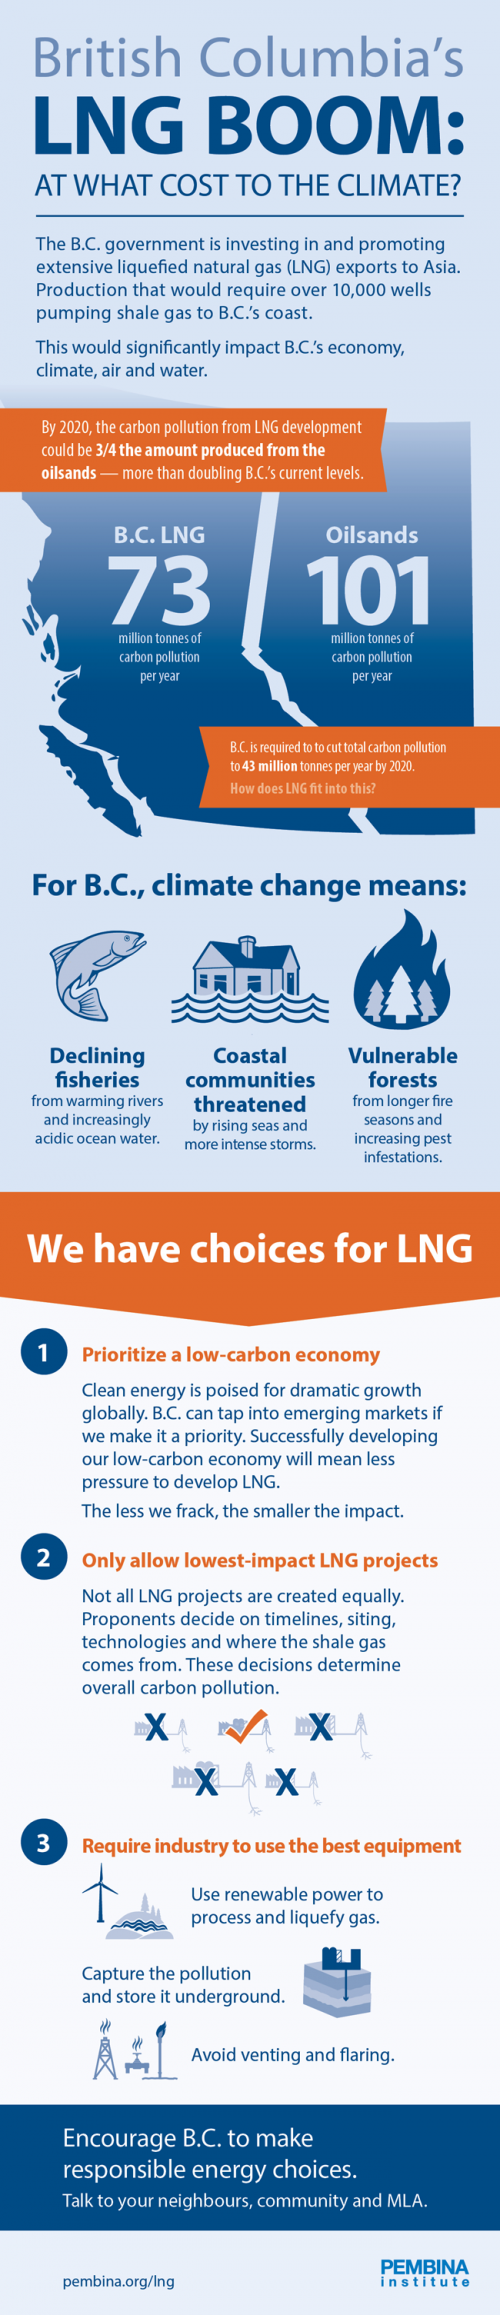 B.C. LNG emissions scale infographic